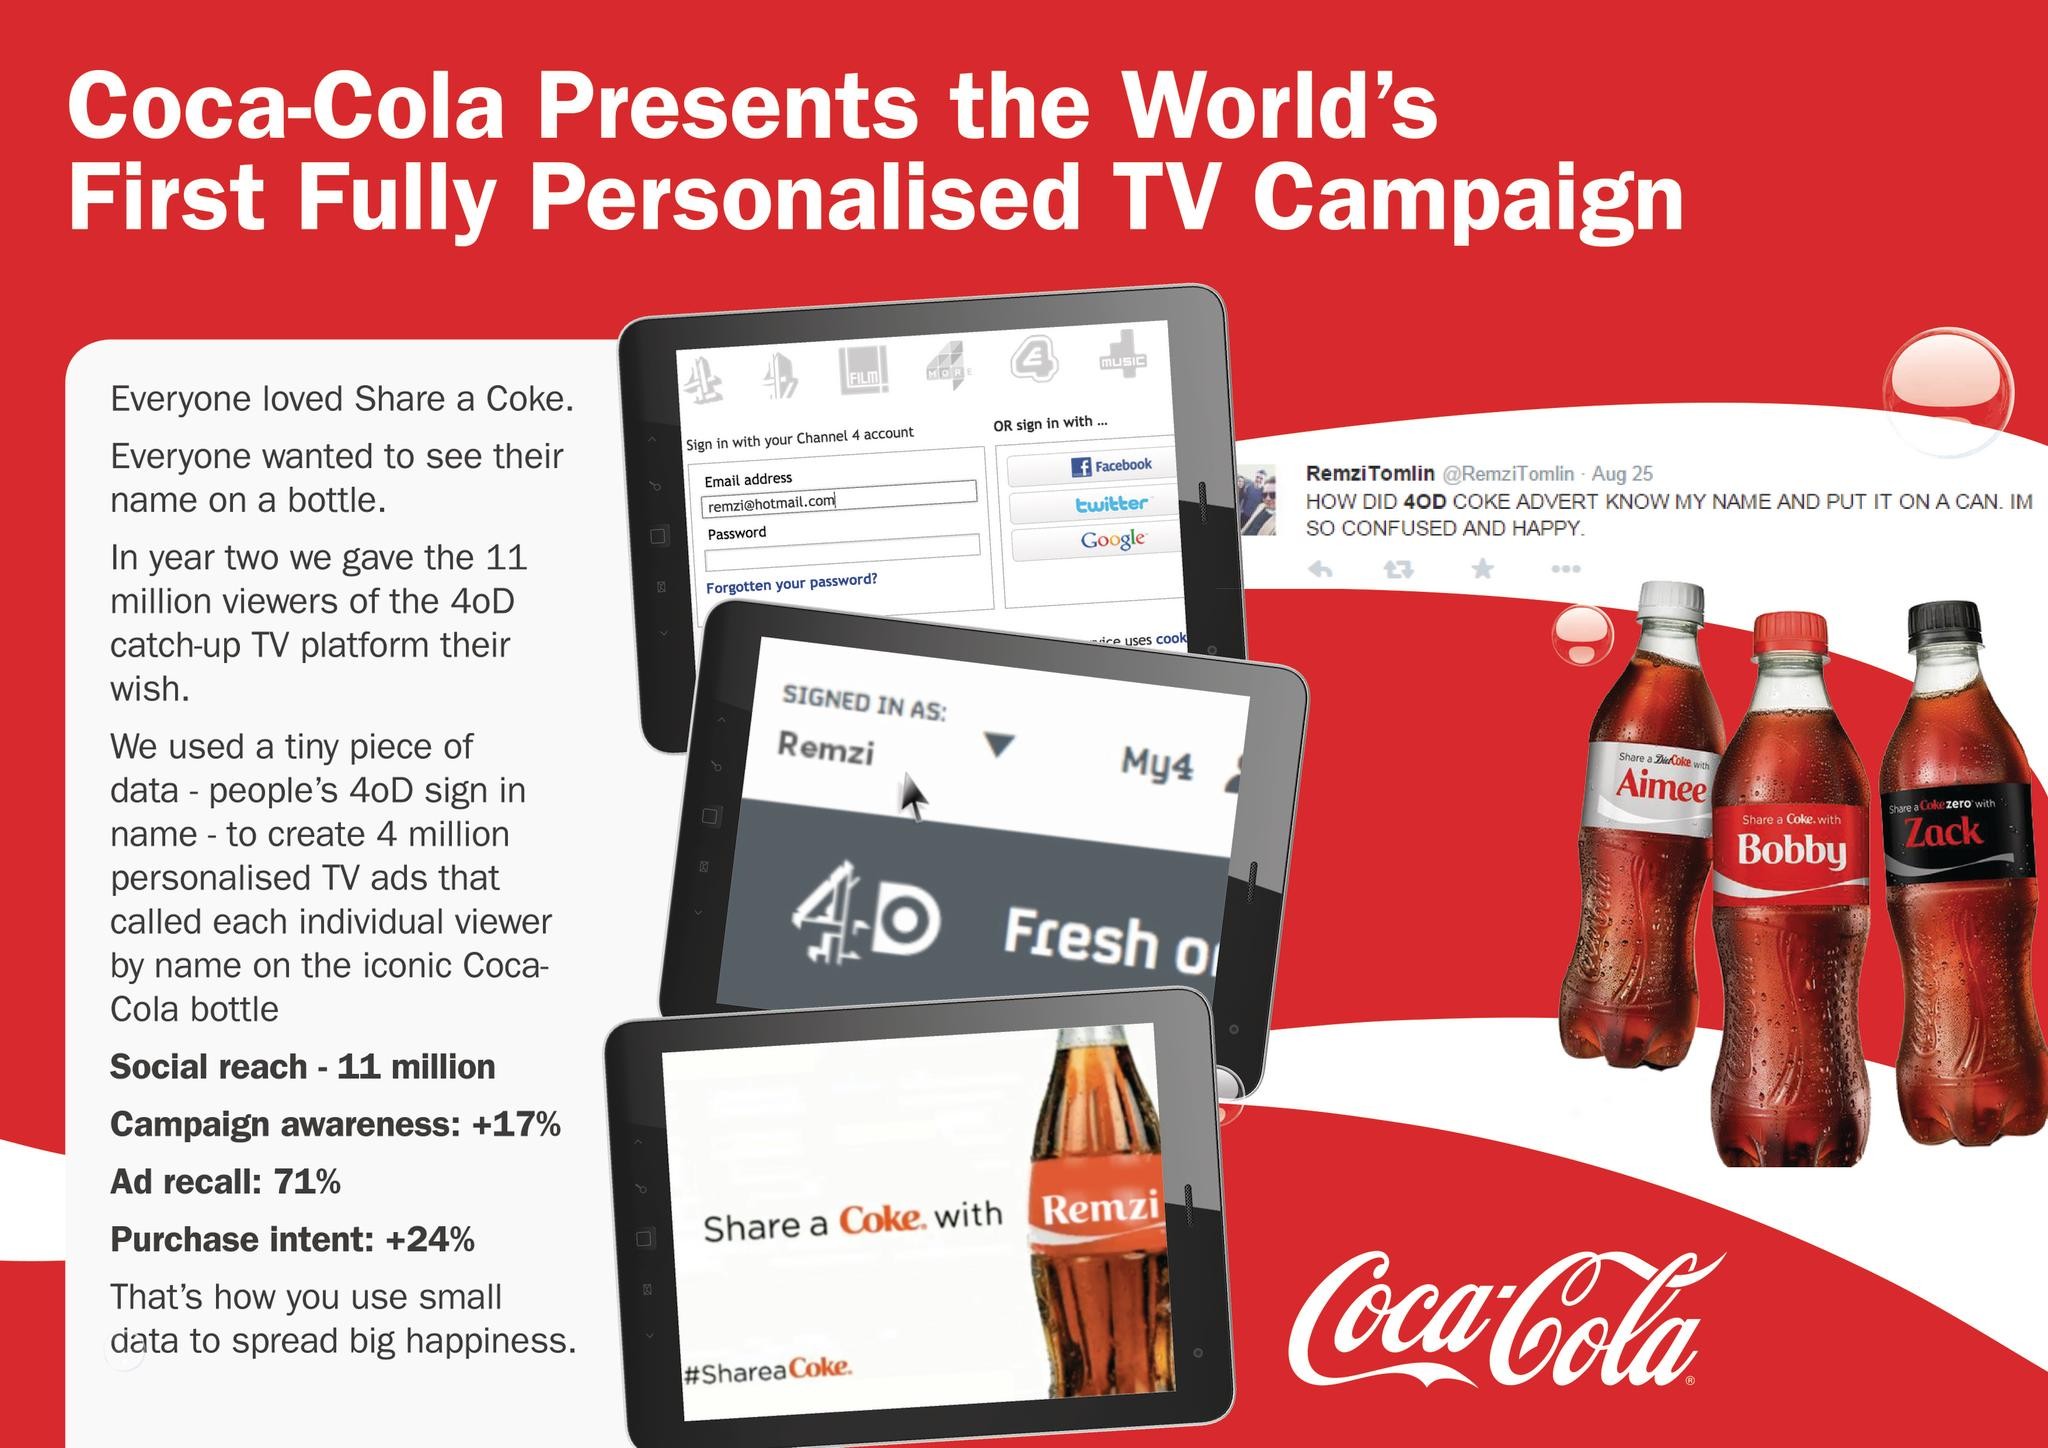 THE WORLD'S FIRST FULLY PERSONALISED TV CAMPAIGN